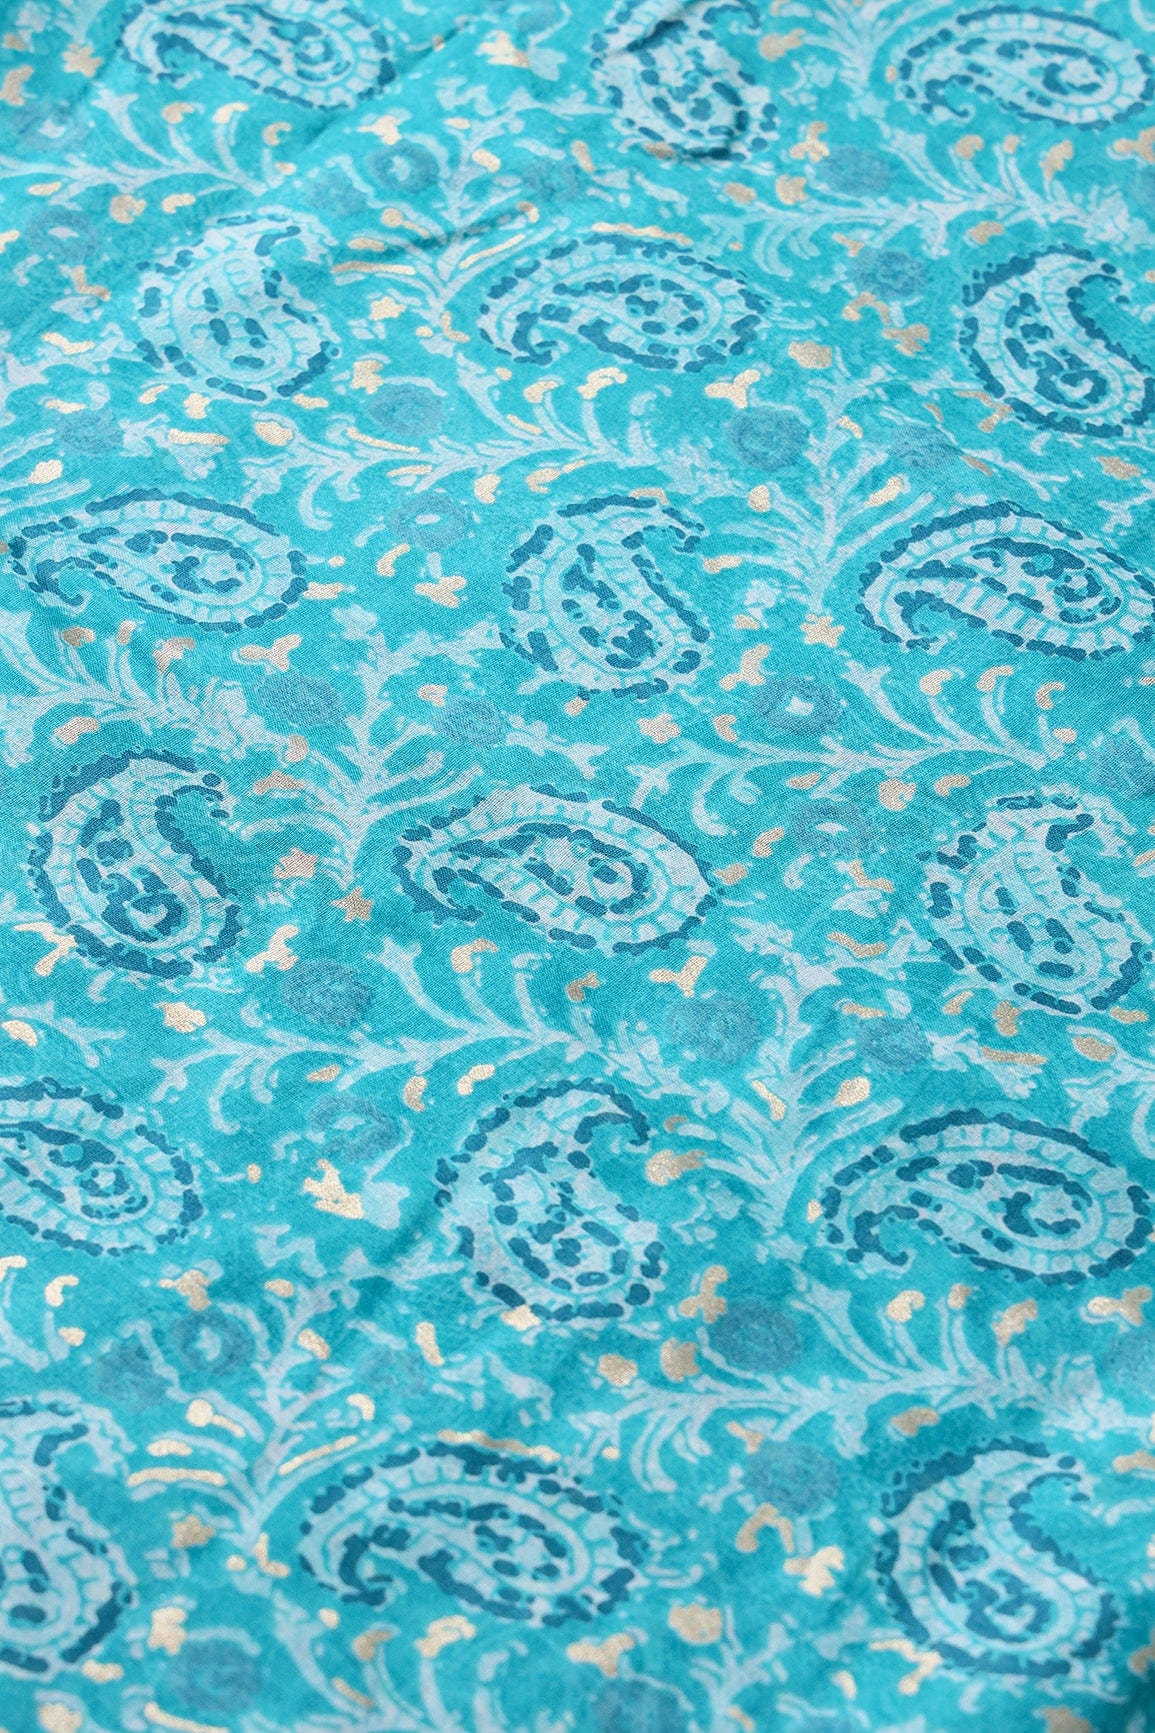 doeraa Prints Turquoise Paisley Pattern With Foil Print On Pure Mul Cotton Fabric